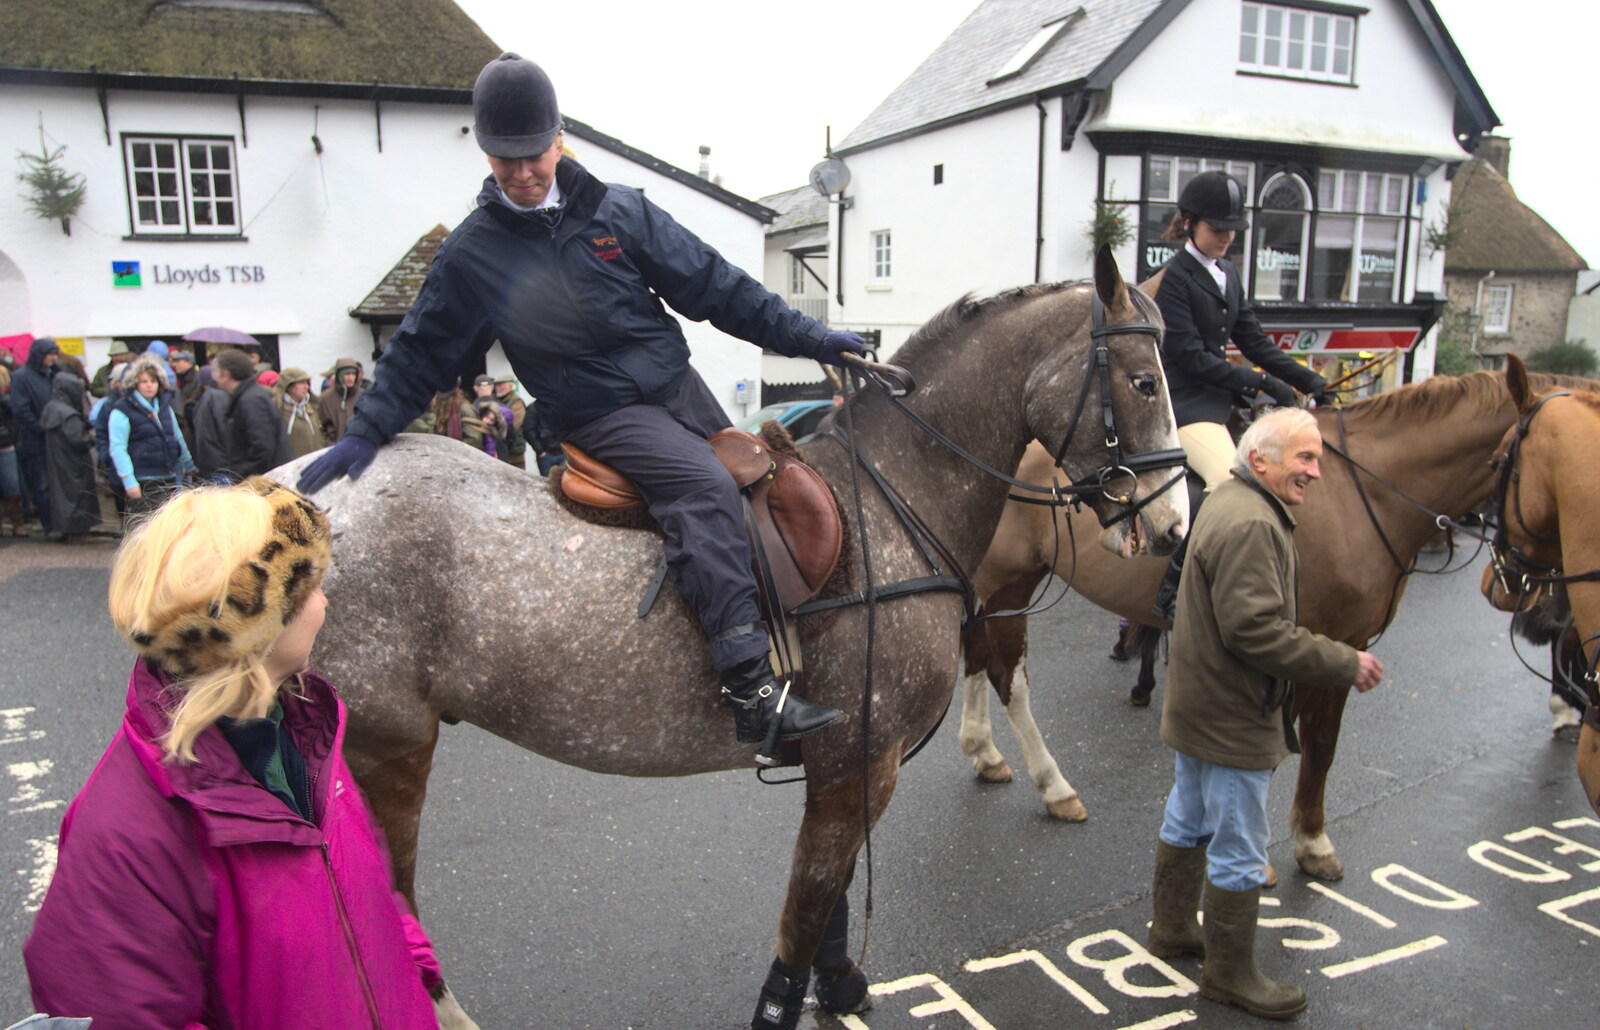 A speckly horse gets a pat on the arse from The Boxing Day Hunt, Chagford, Devon - 26th December 2012